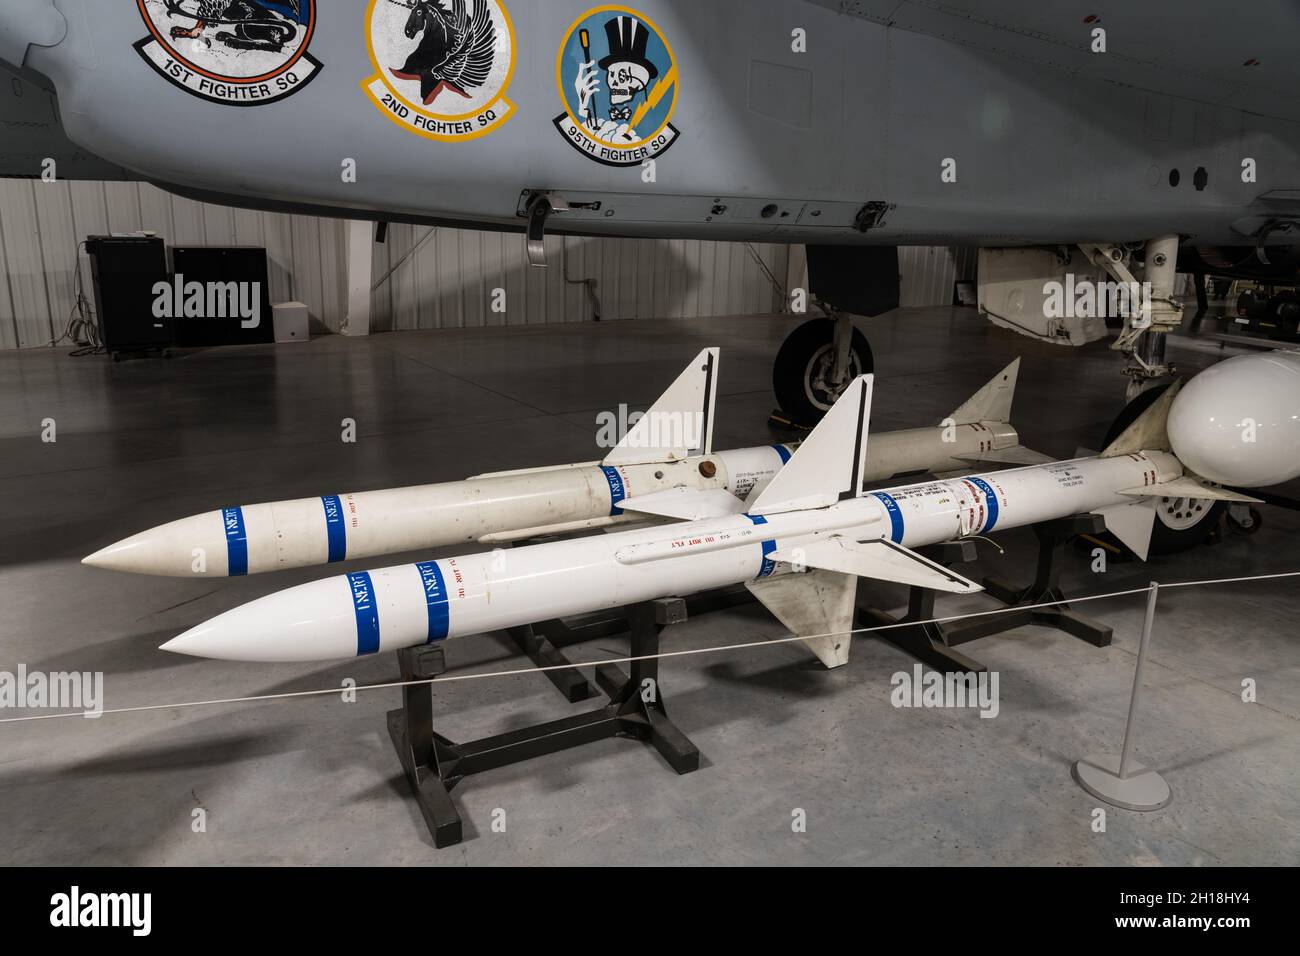 AIM-7E Sparrow air-to-air missiles in the Hill Aerospace Museum. Stock Photo